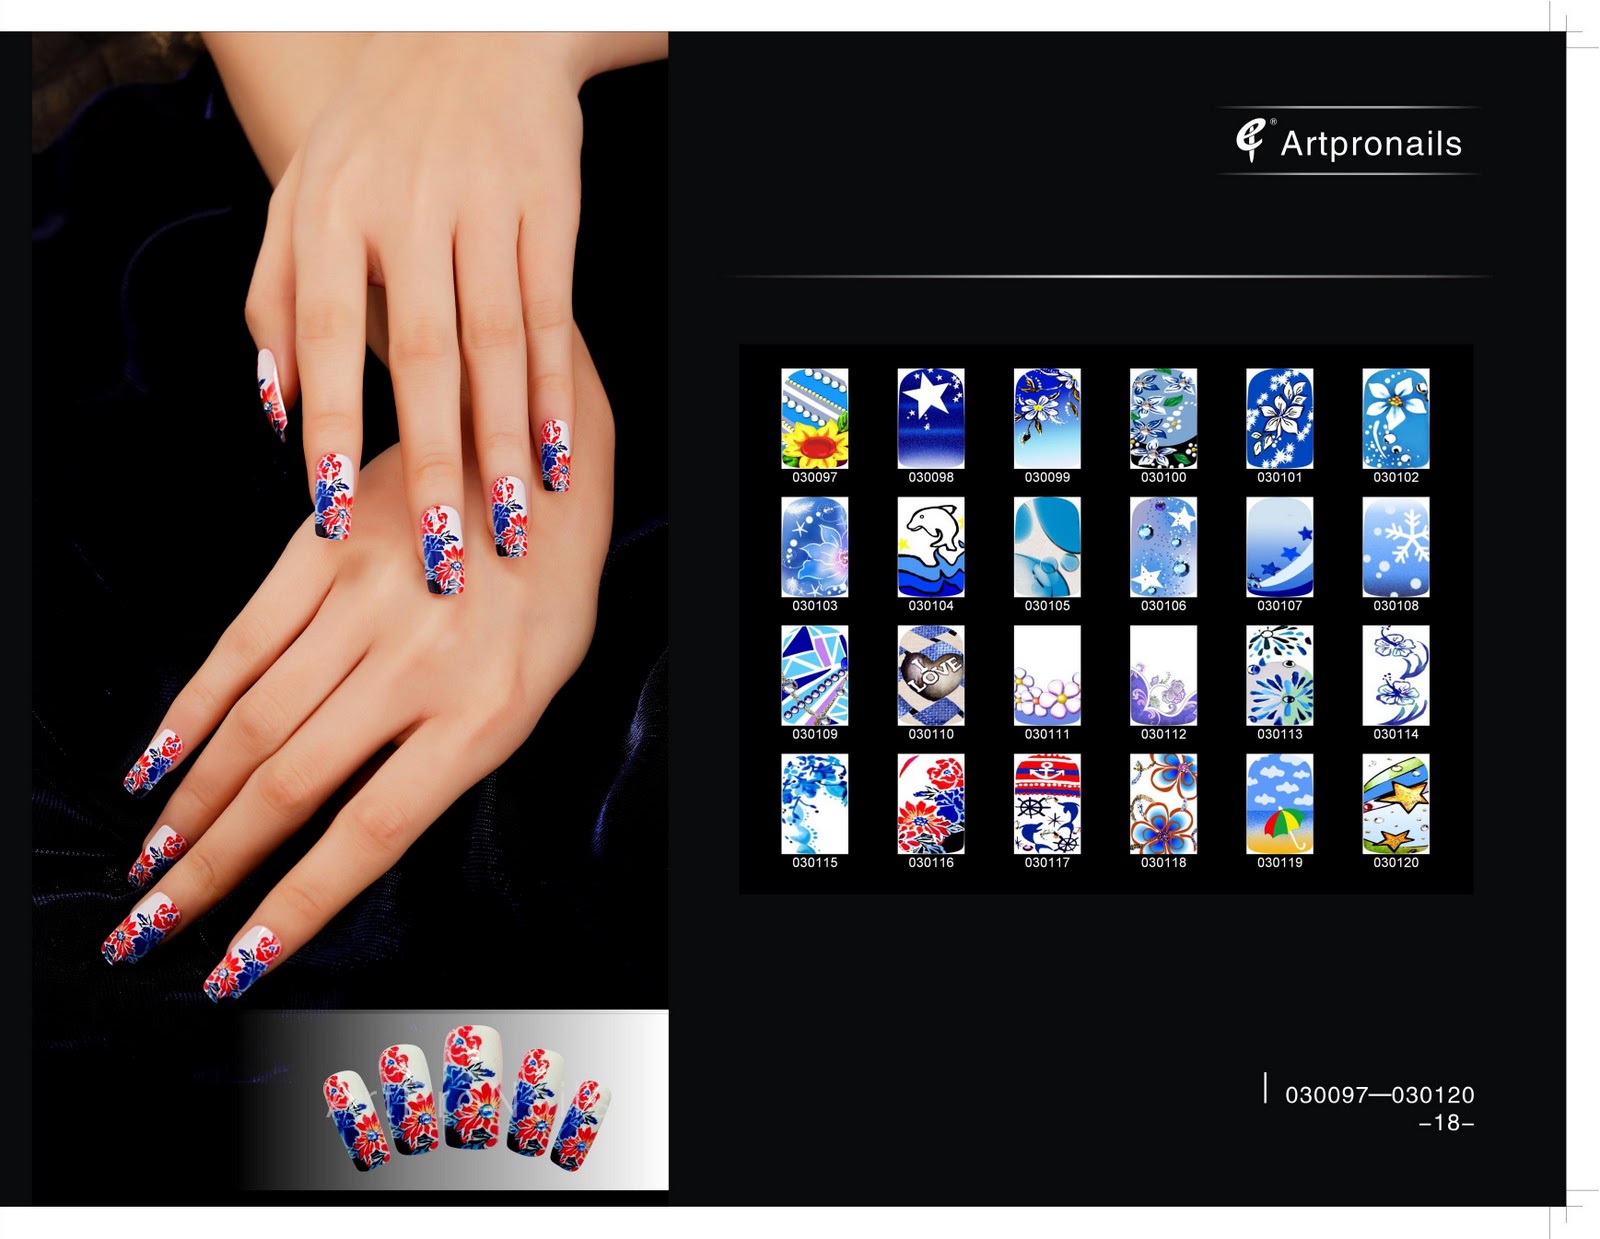 3. Nail Art Catalogs for Inspiration - wide 7